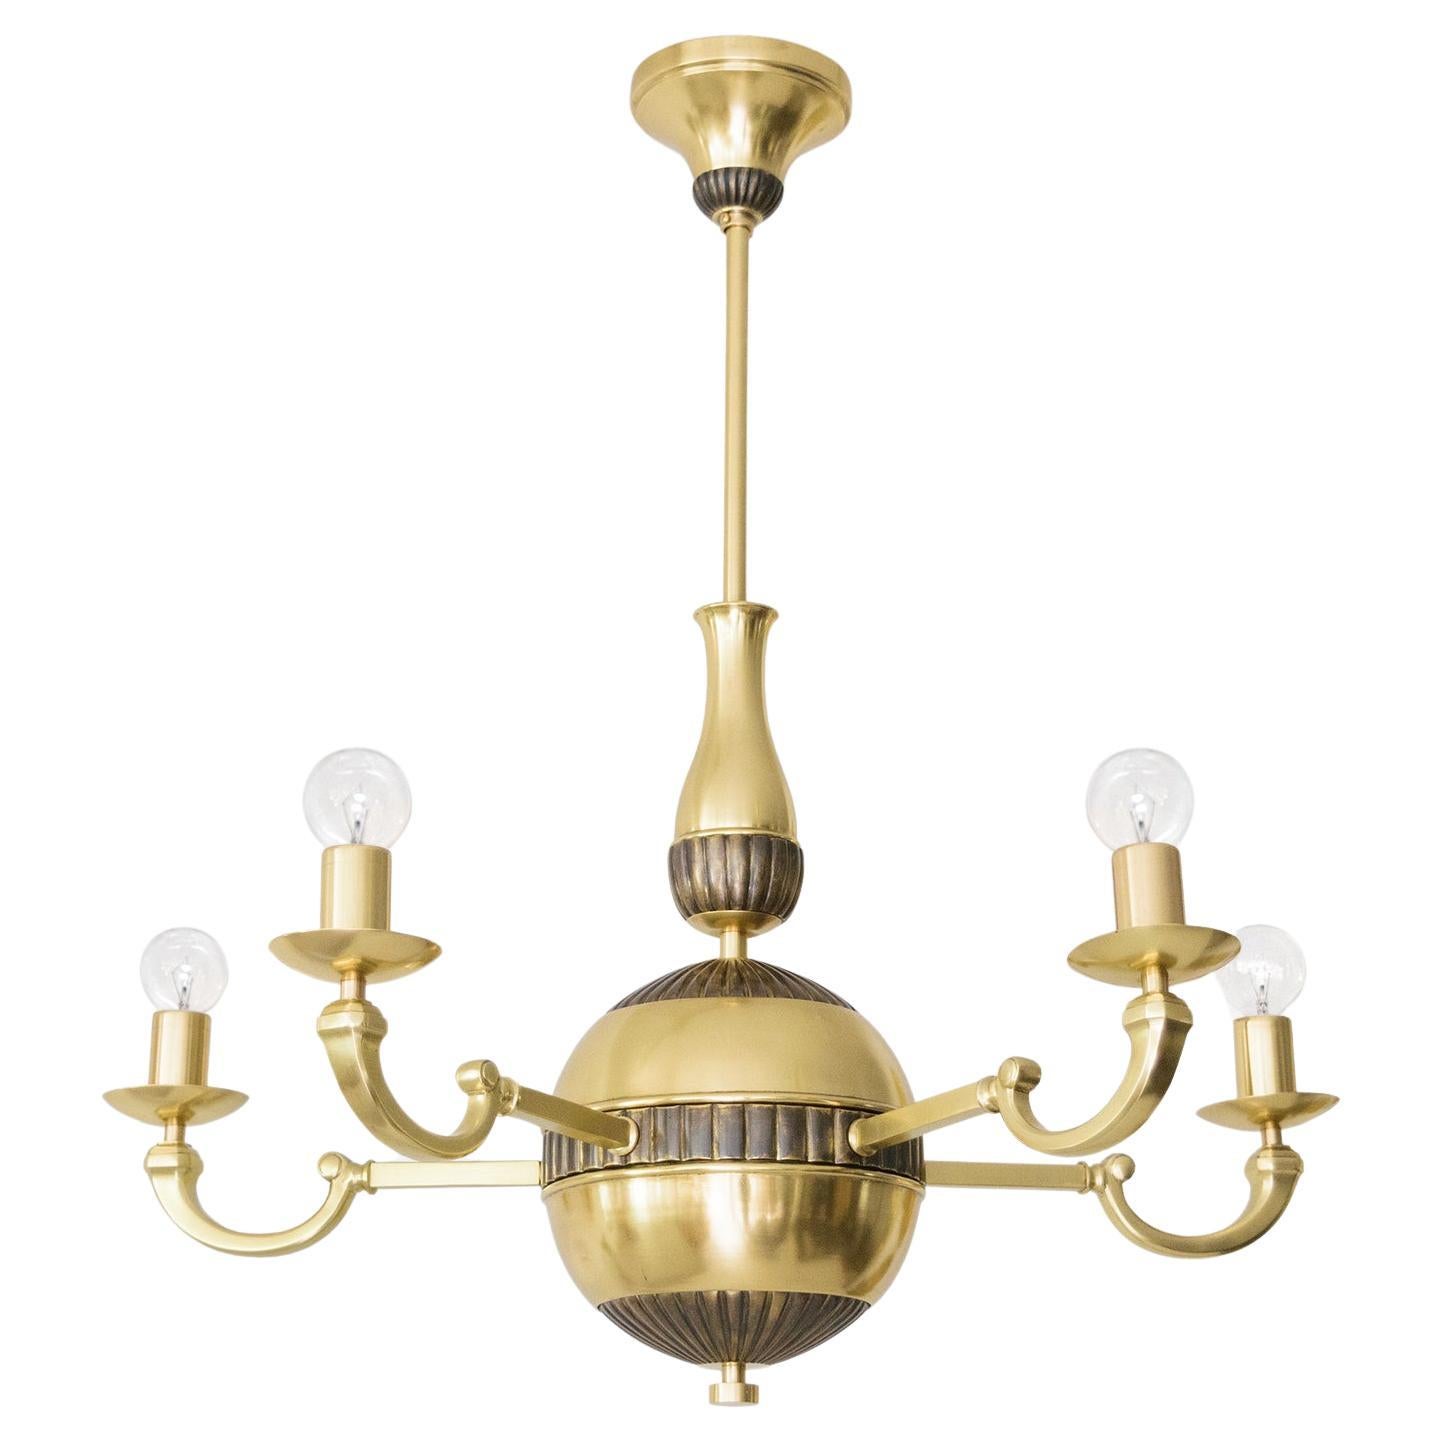 Swedish Art Deco Brass 5-arm Chandelier with patinated details  For Sale